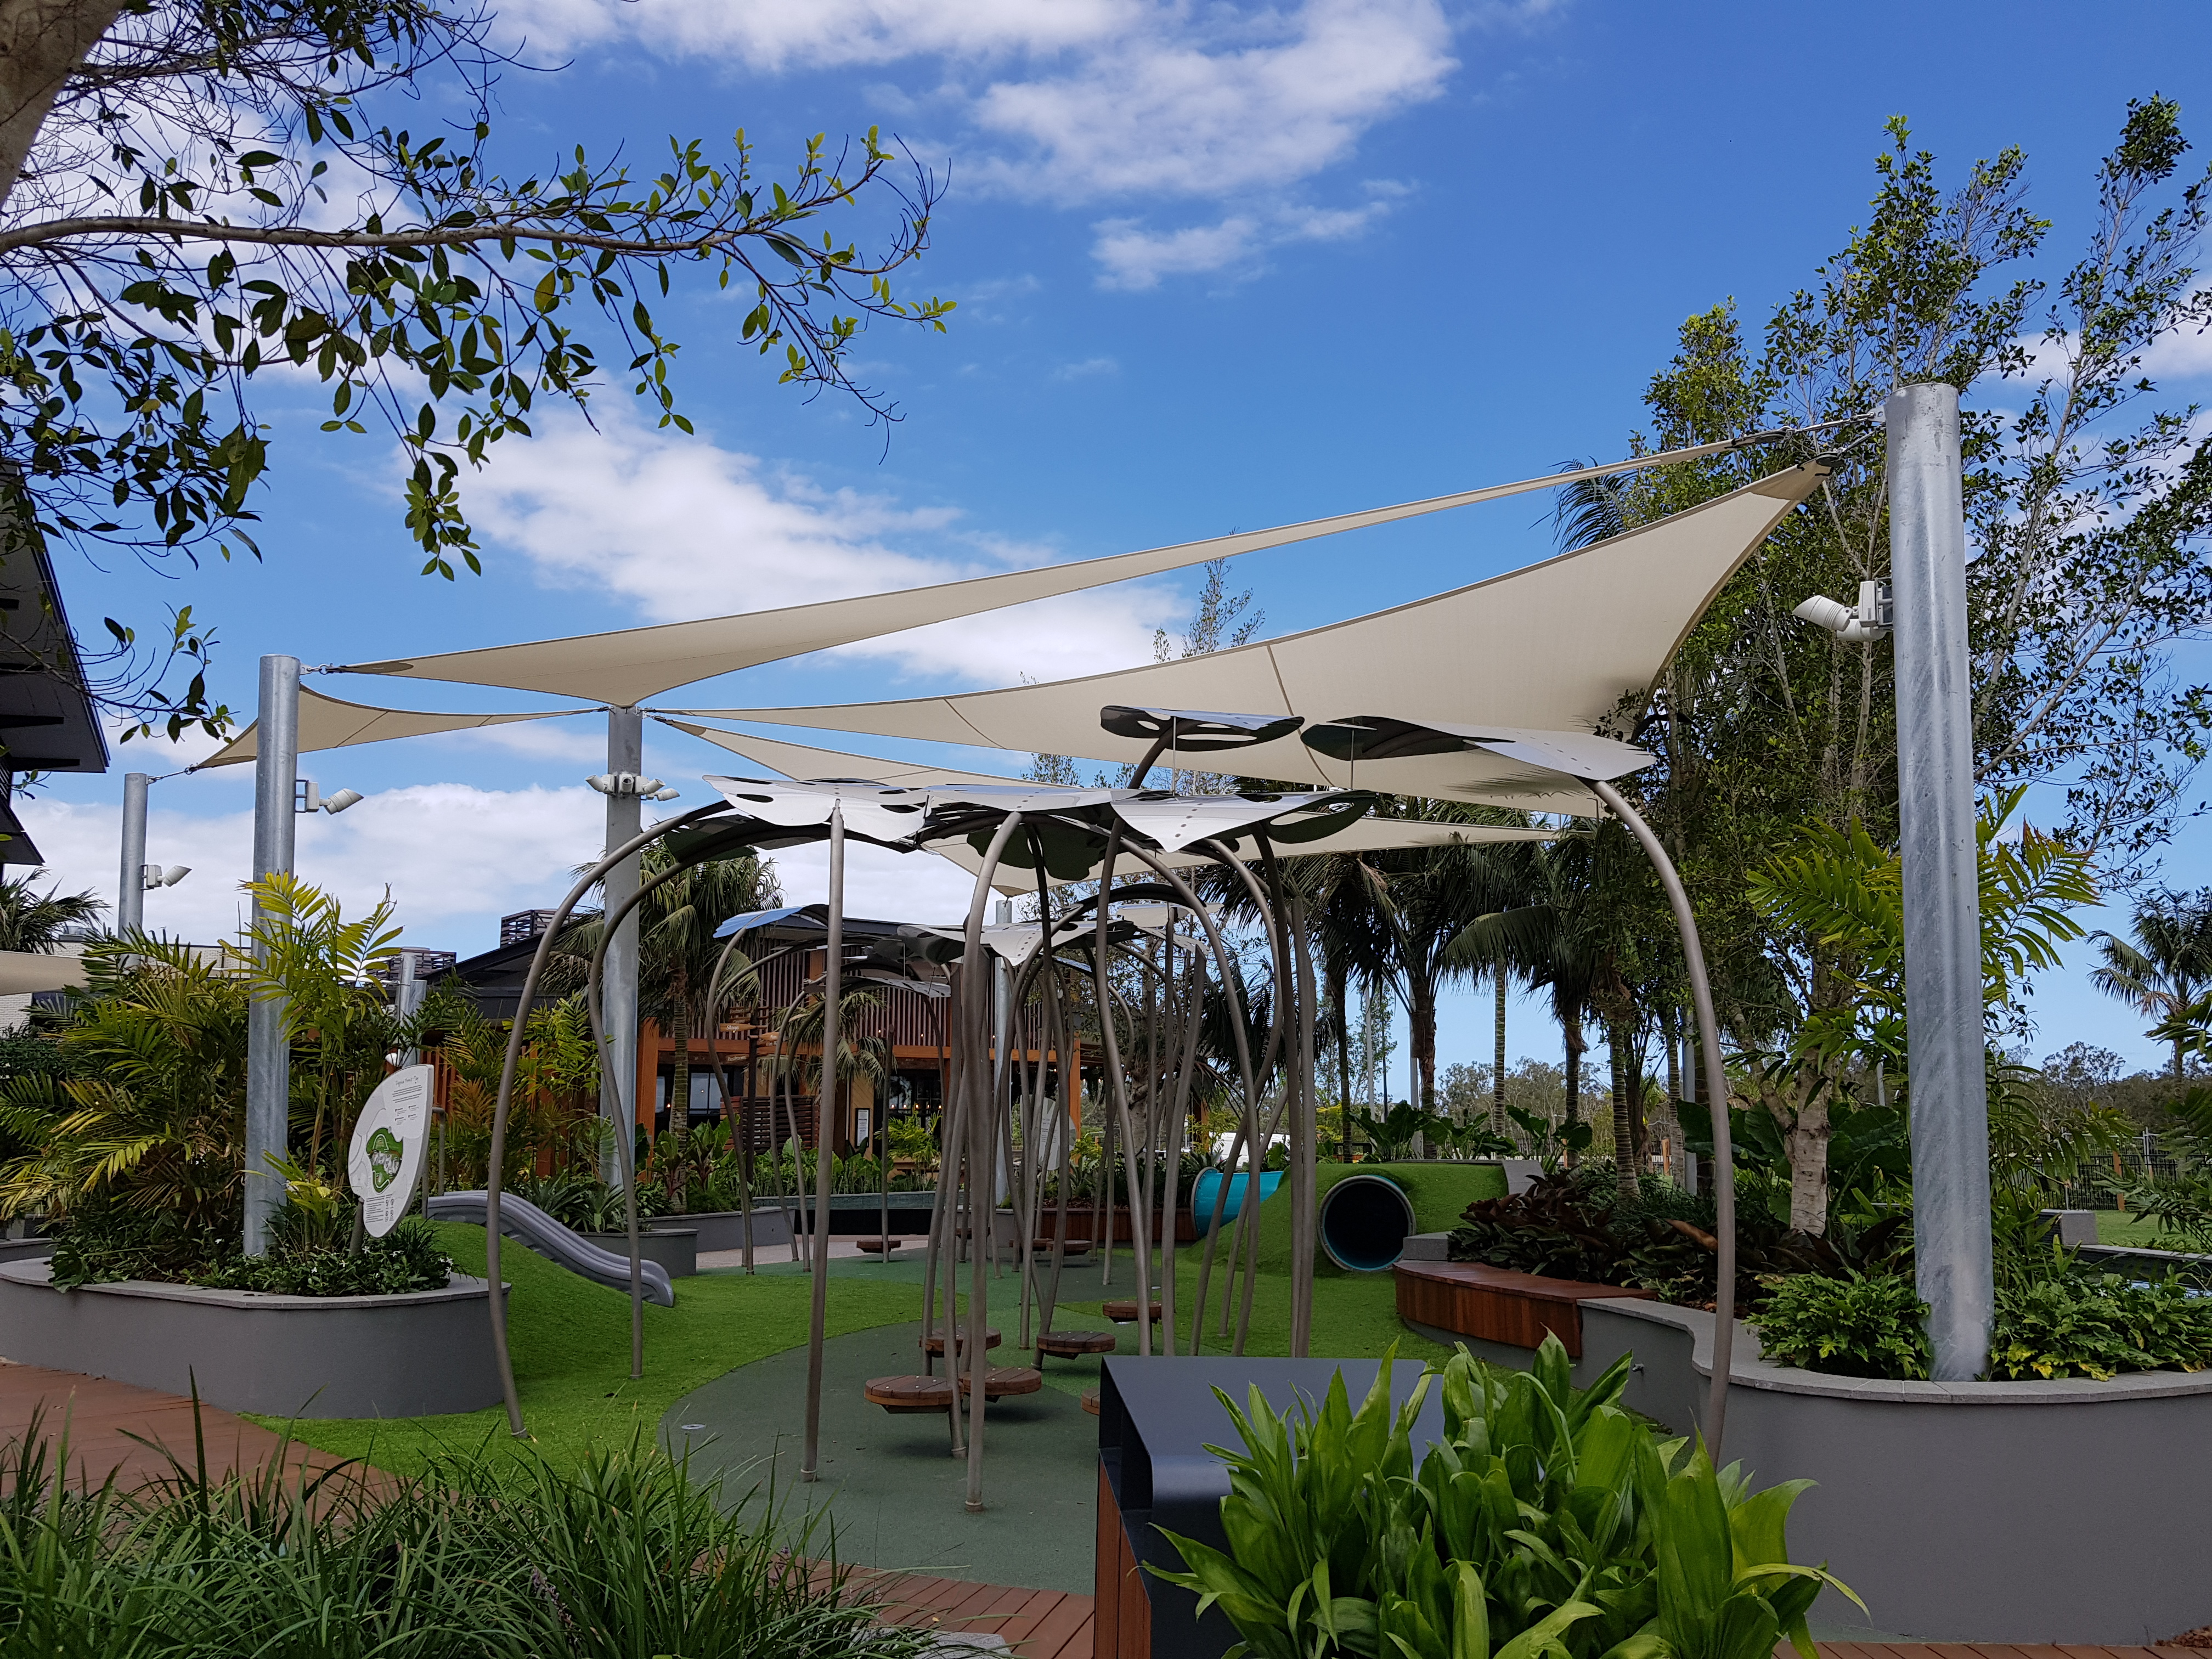 Westfield Coomera shade structure installed by Versatile Structures